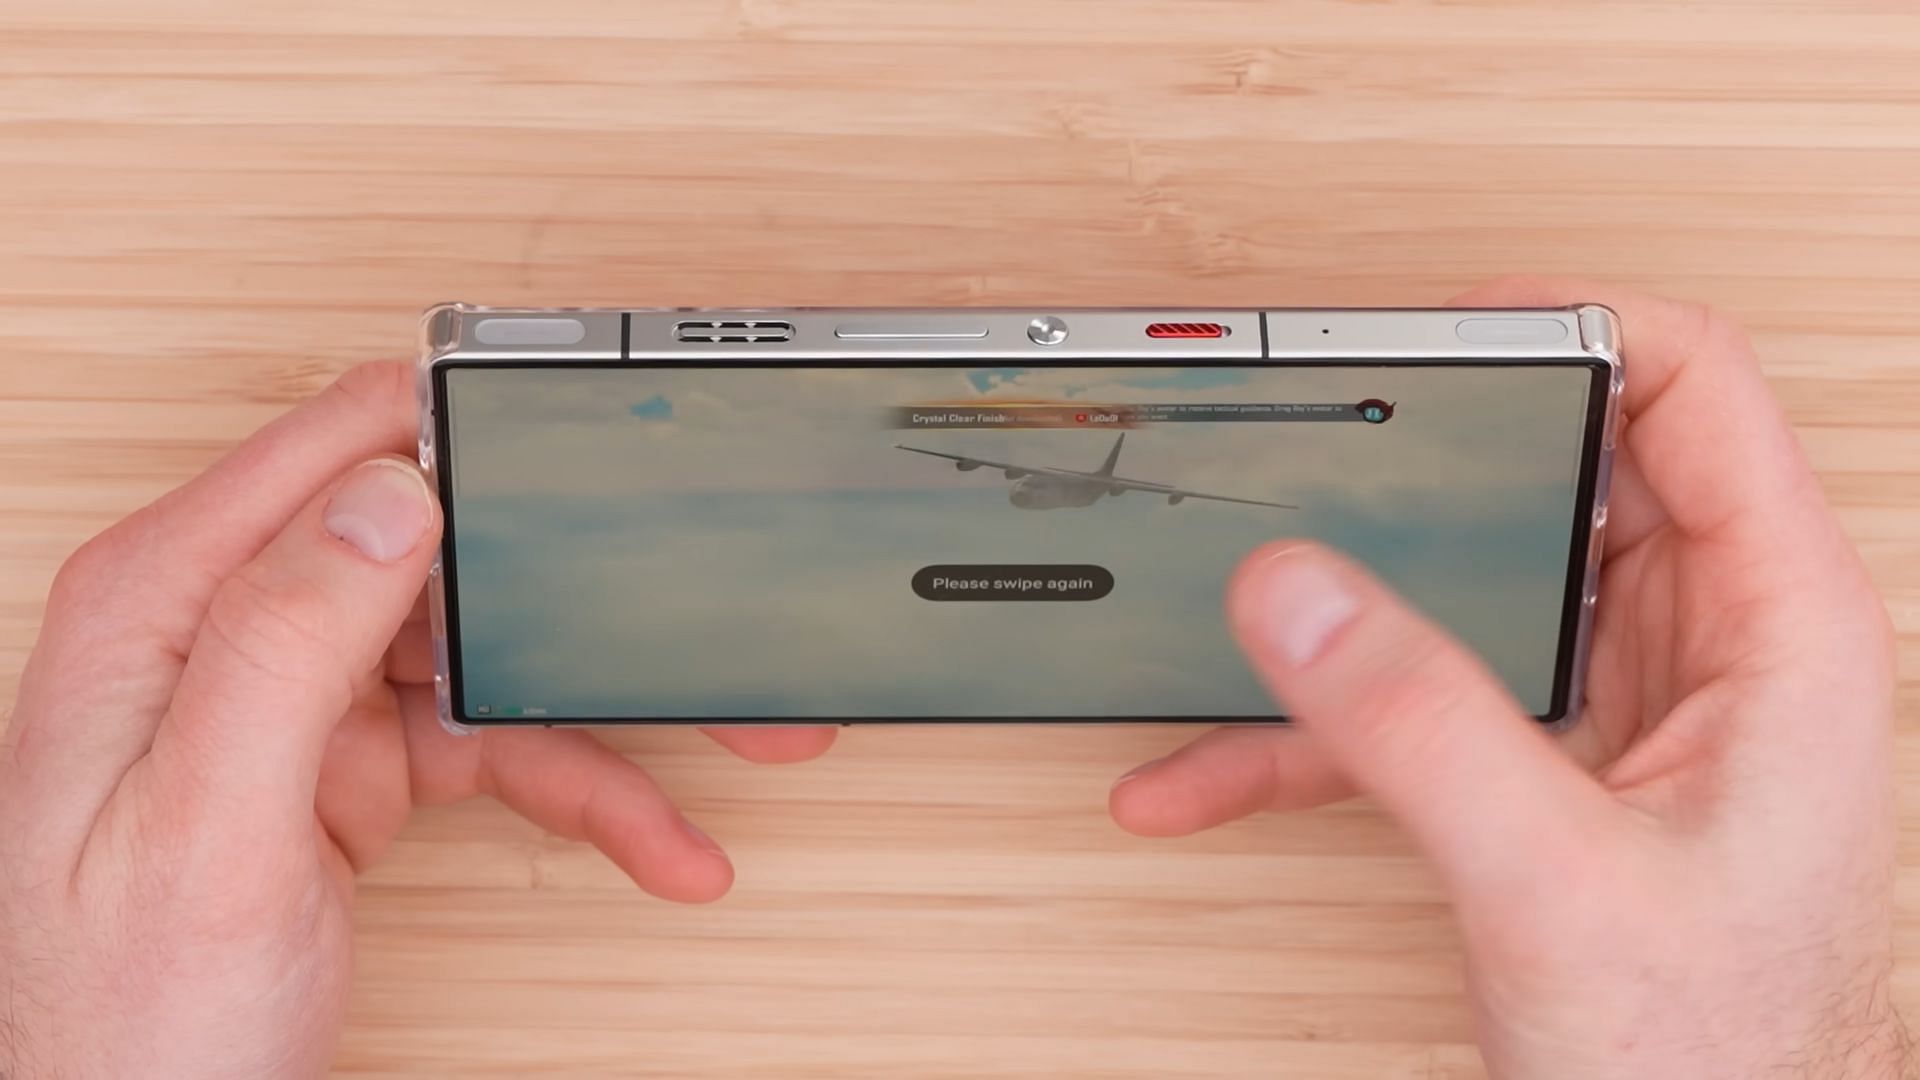 ZTE Red Magic phone with shoulder trigger buttons on the top of the phone (Image via Unbox Therapy/YouTube)